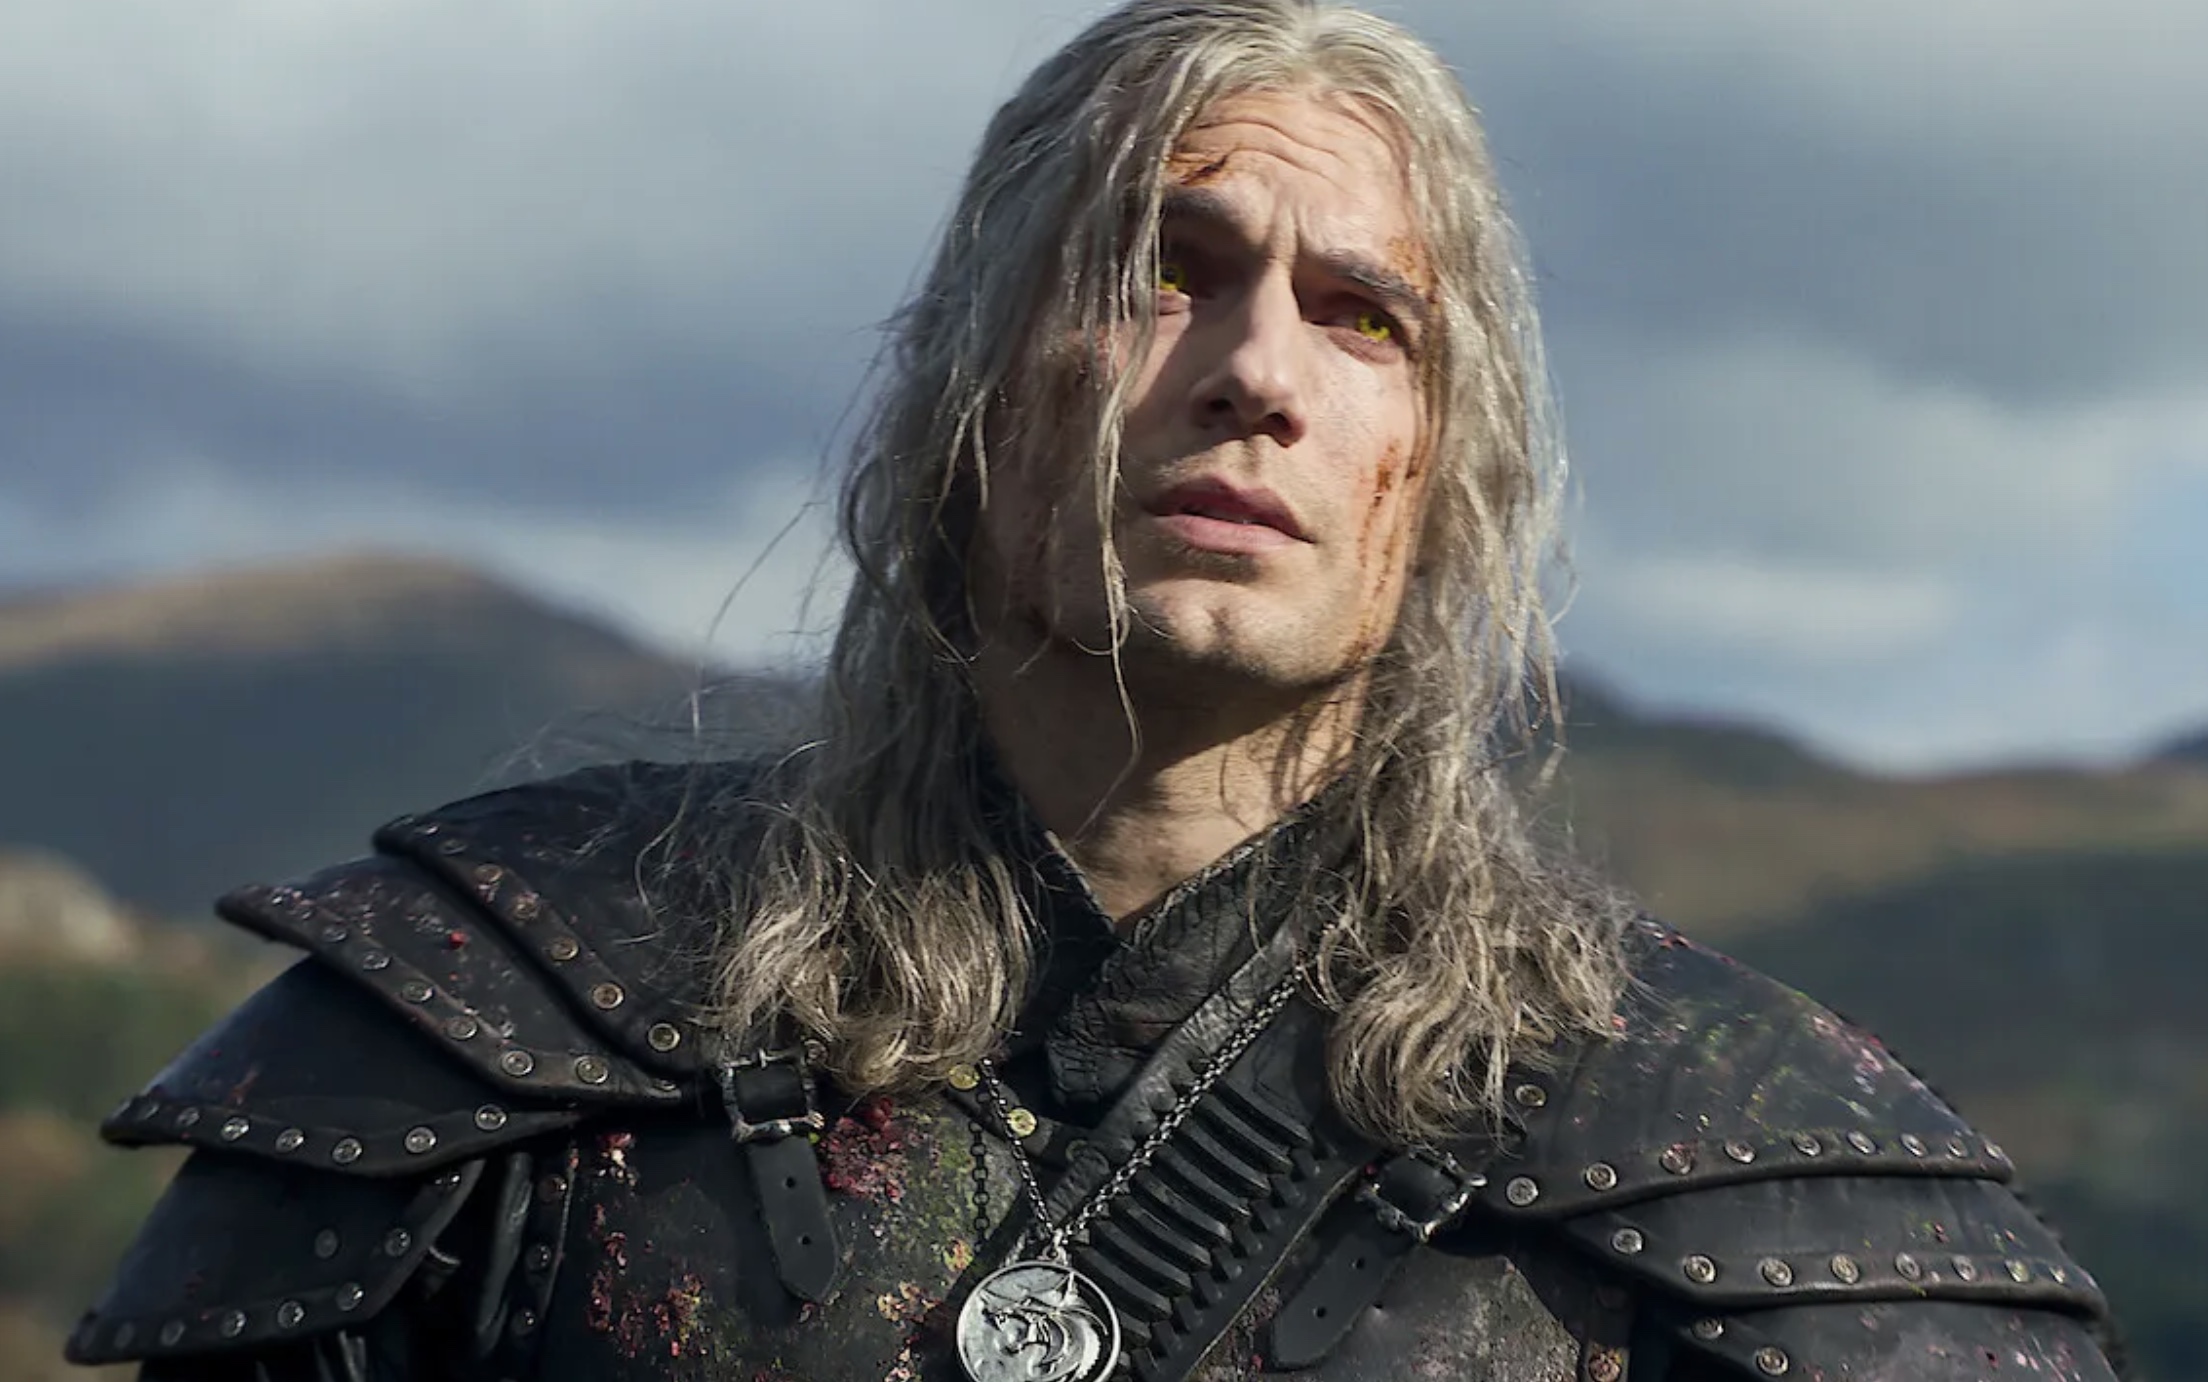 When Will The Witcher Season 4 Be Released?